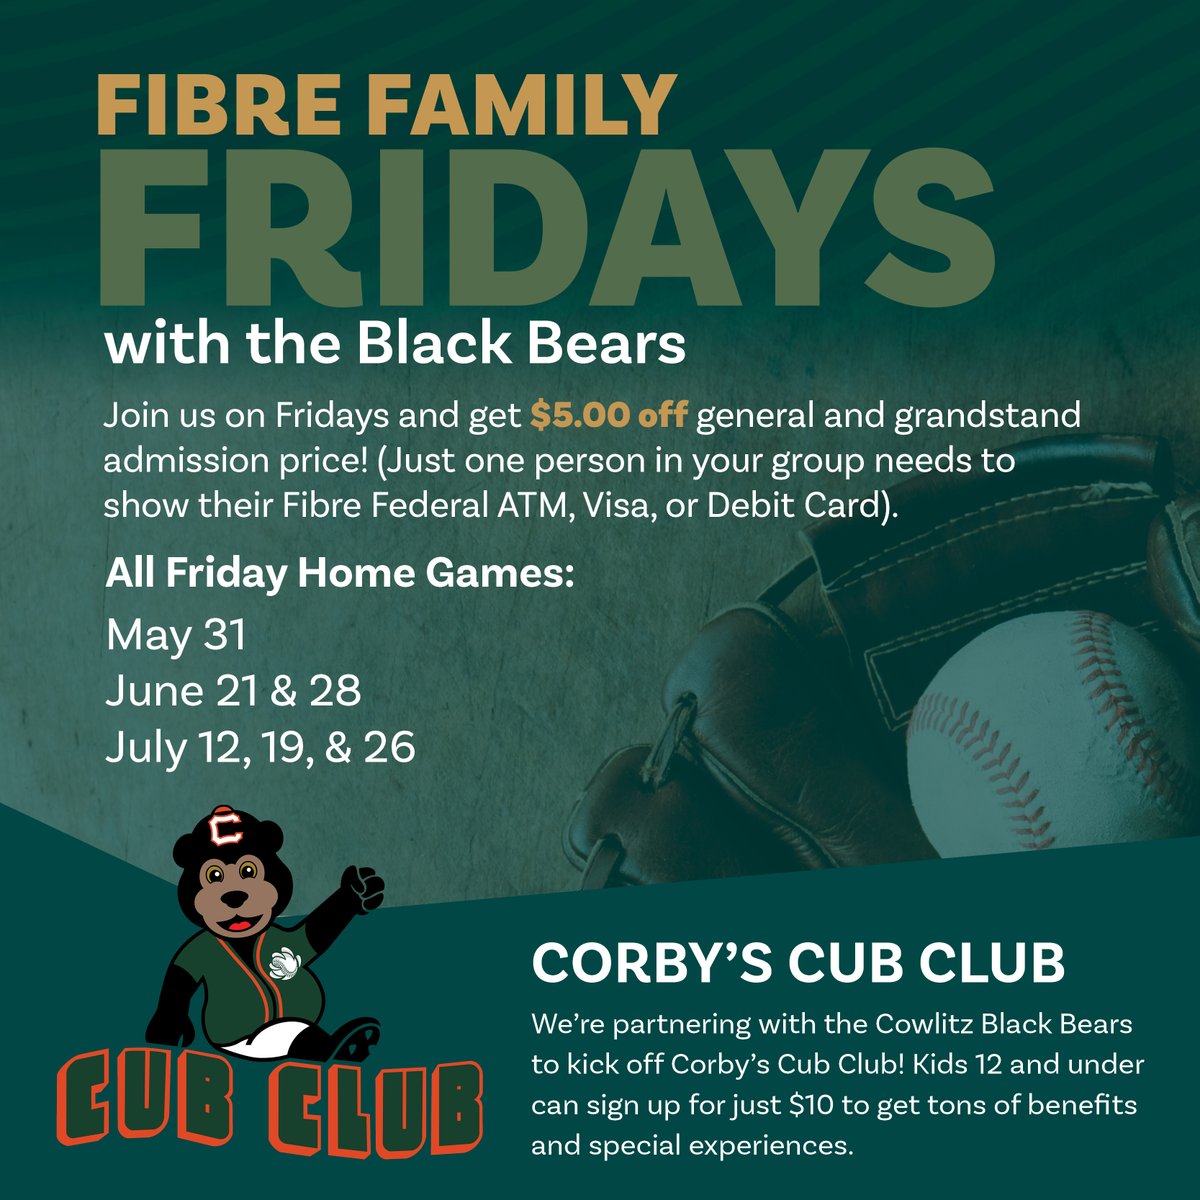 We're looking forward to a great season with the @Cowlitz Black Bears! Get discounted admission on Fibre Family Fridays when you show your FFCU card. And be sure to sign up your fans 12 & under for Corby's Cub Club! Learn about all the perks at fibrecu.com/corbys-cub-club. 😄